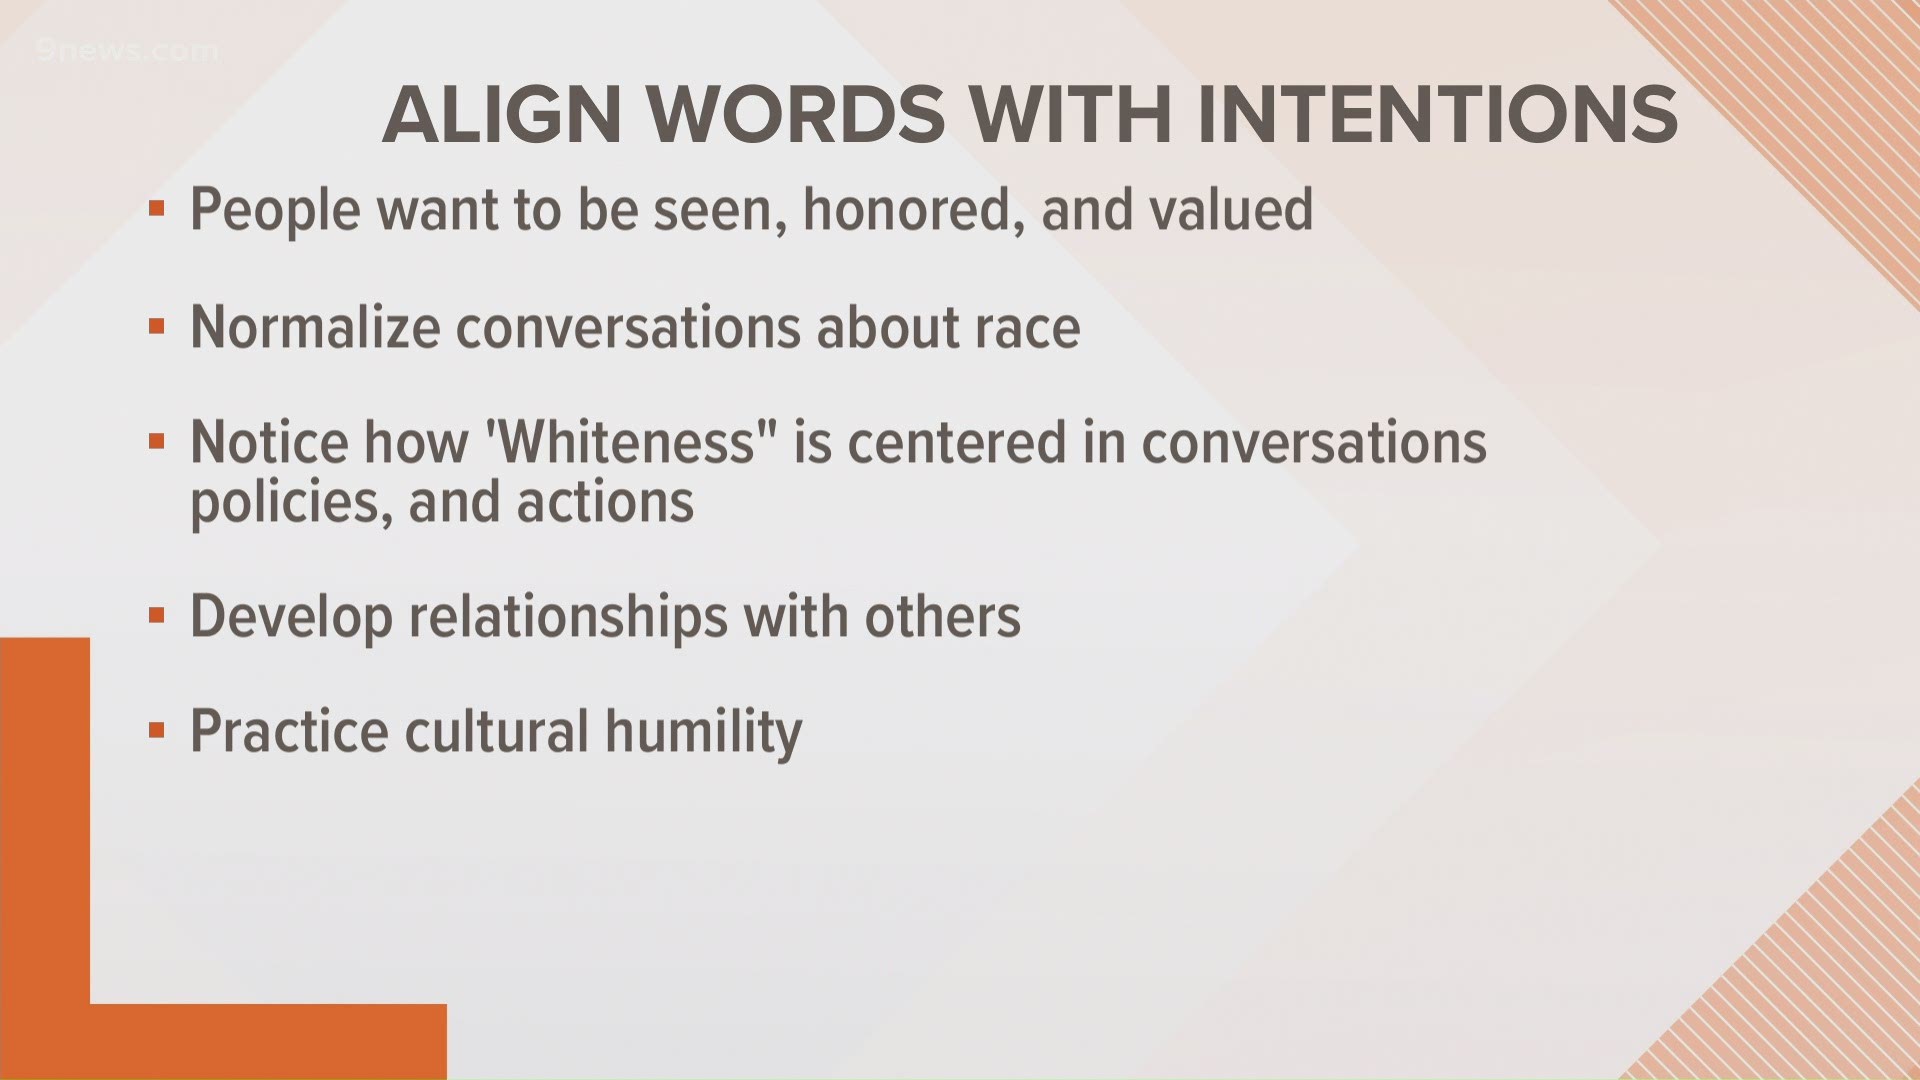 Racial equity expert Dr. Rosemarie Allen shares how we can better align our words with our intentions.